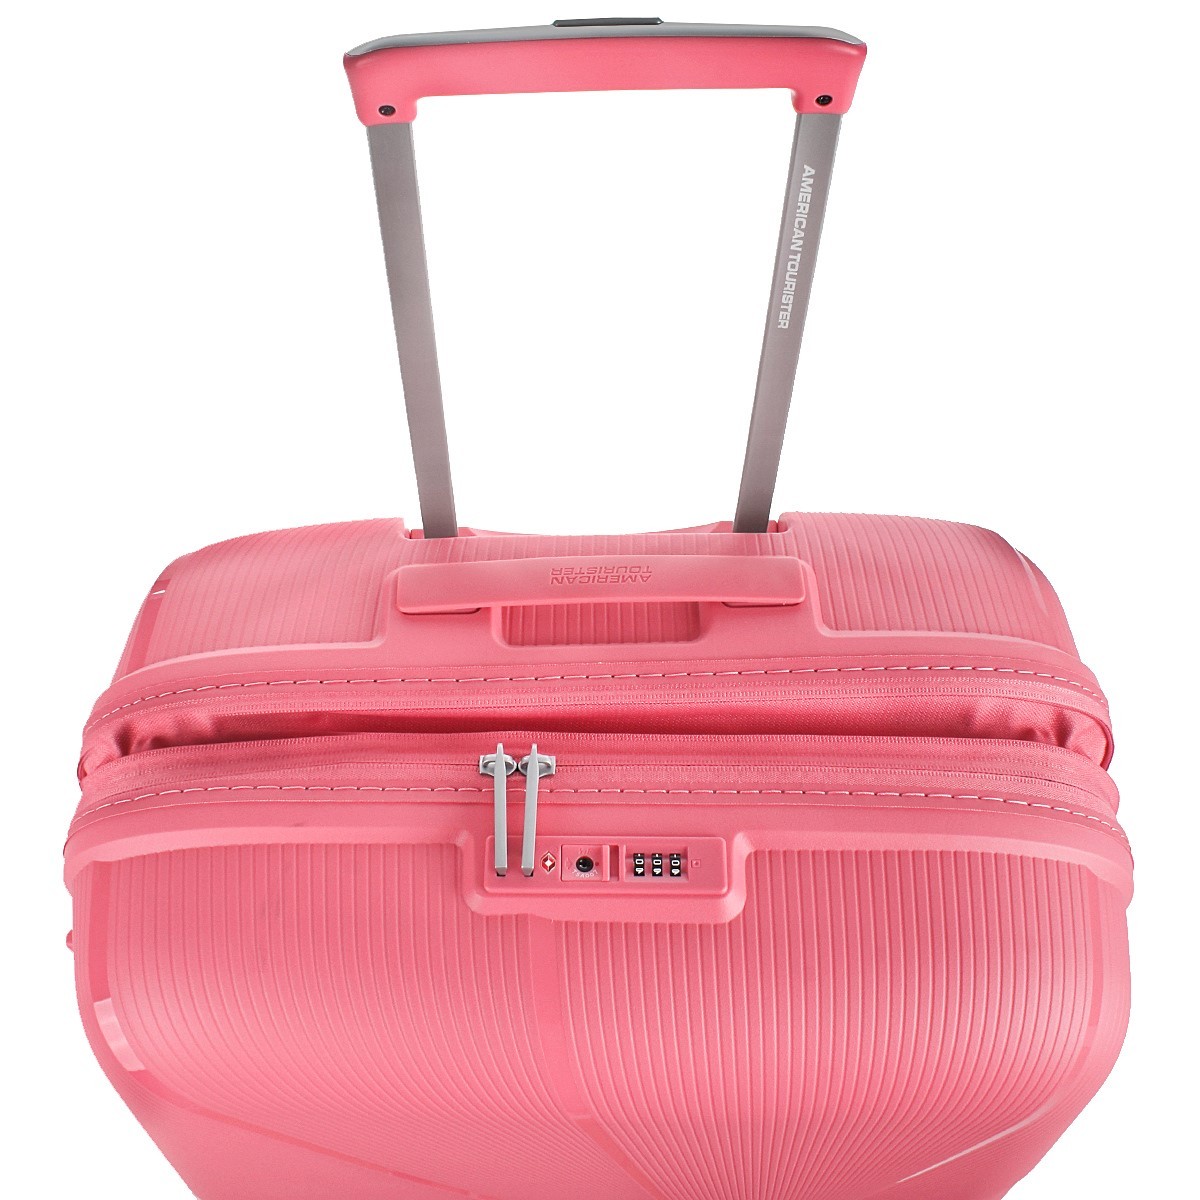 American tourister by samsonite Spinner l 4 ruote Sun kissed coral Starvibe MD5*00004